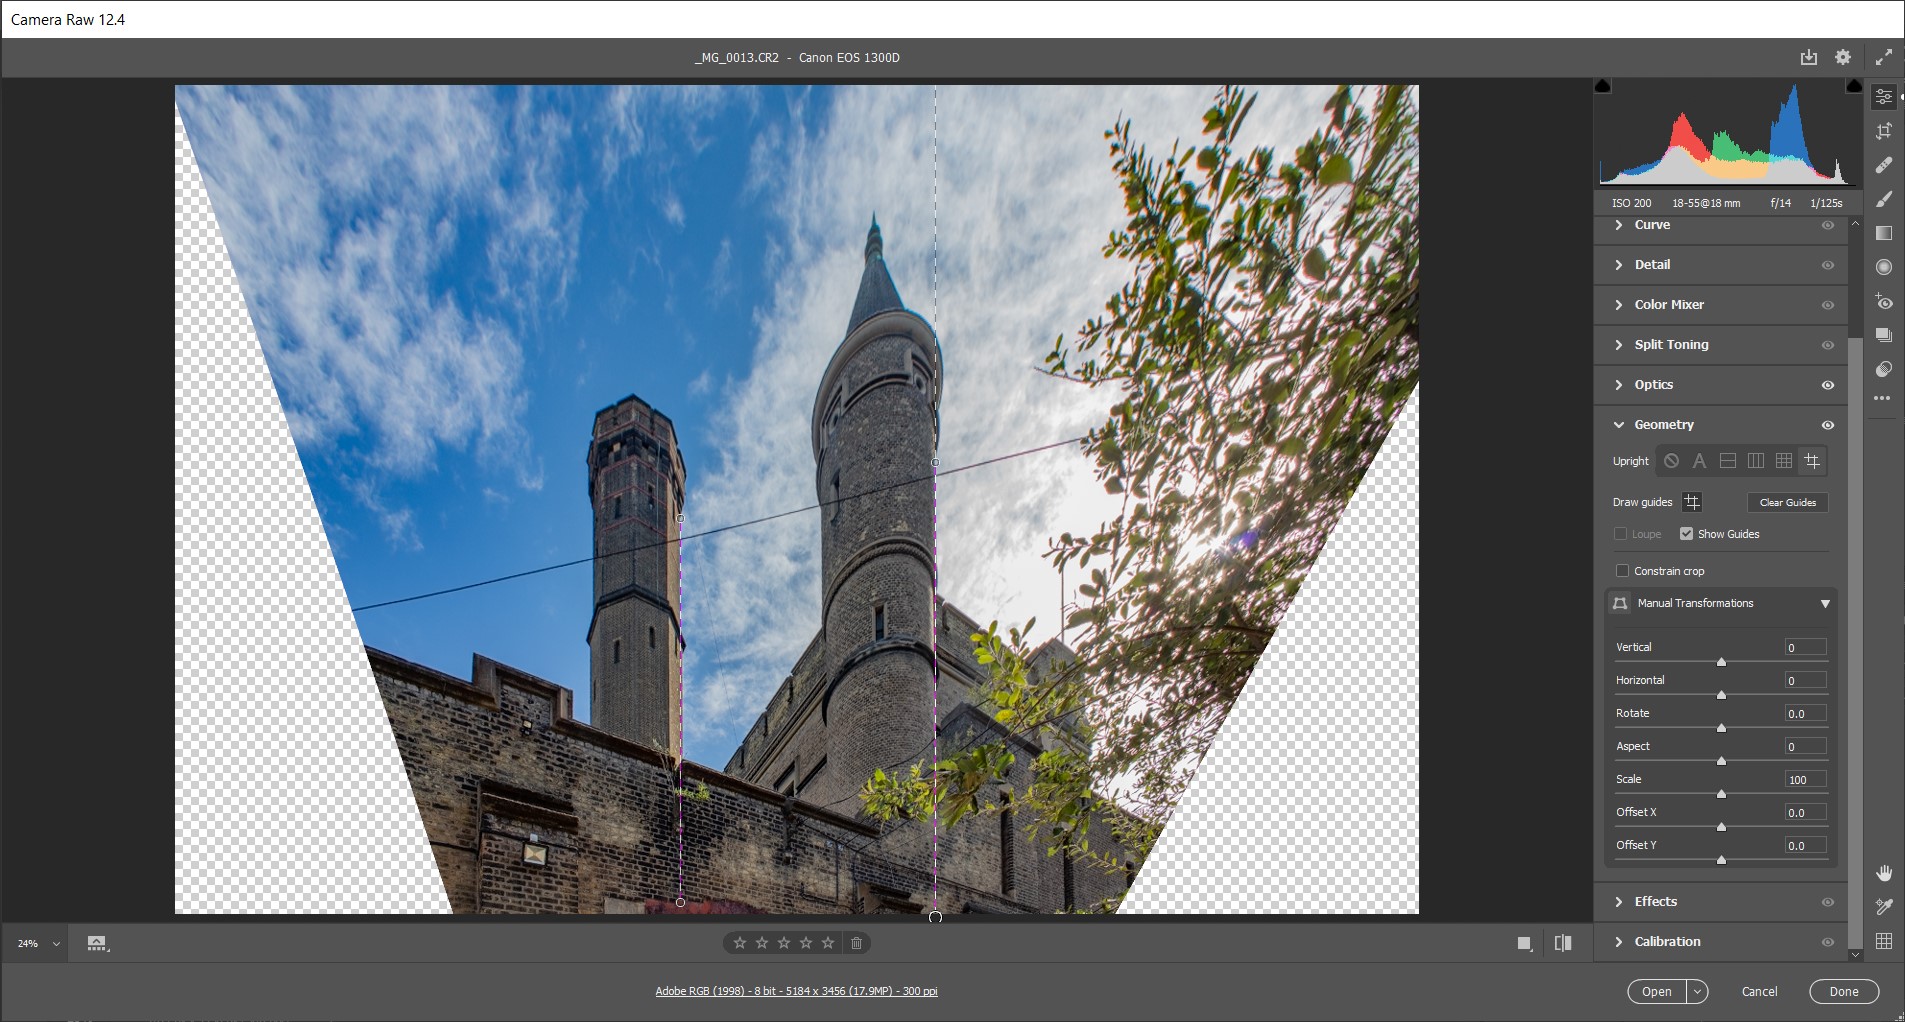 Why do Buildings Lean in Photos? Photoshop Camera Raw Guided Line Perspective correction tool.